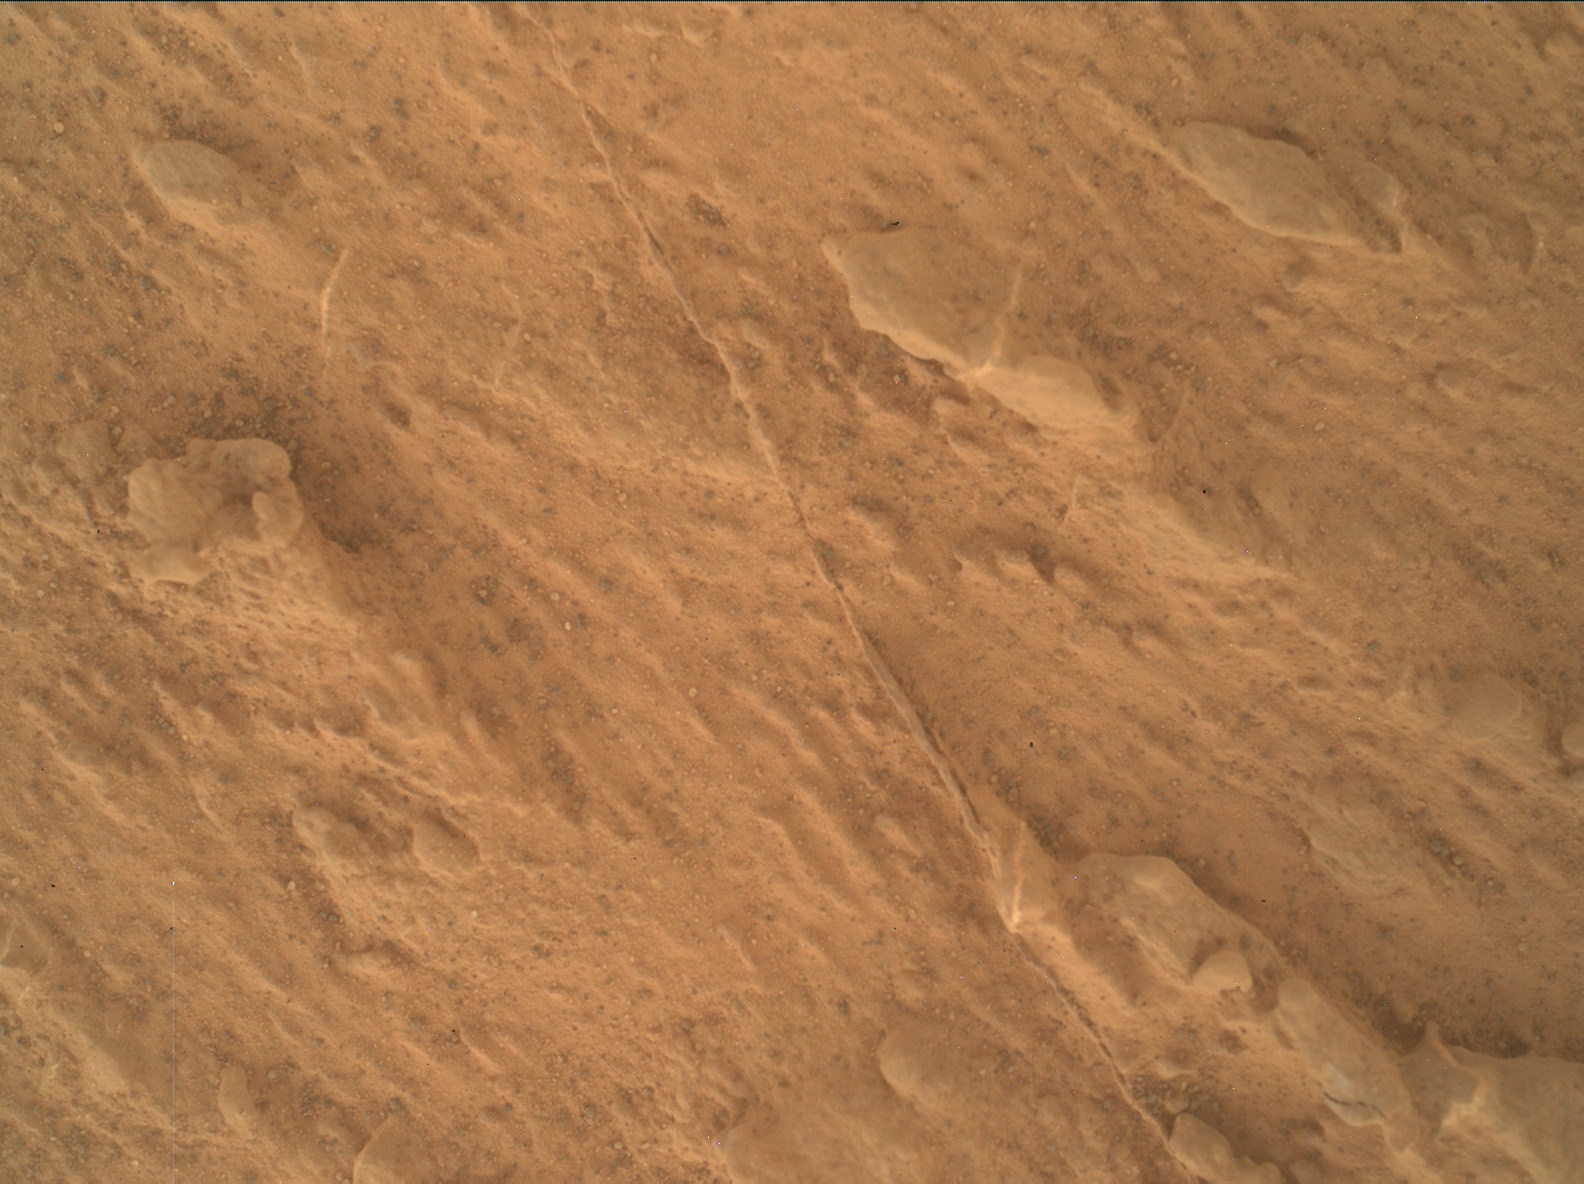 Nasa's Mars rover Curiosity acquired this image using its Mars Hand Lens Imager (MAHLI) on Sol 3192